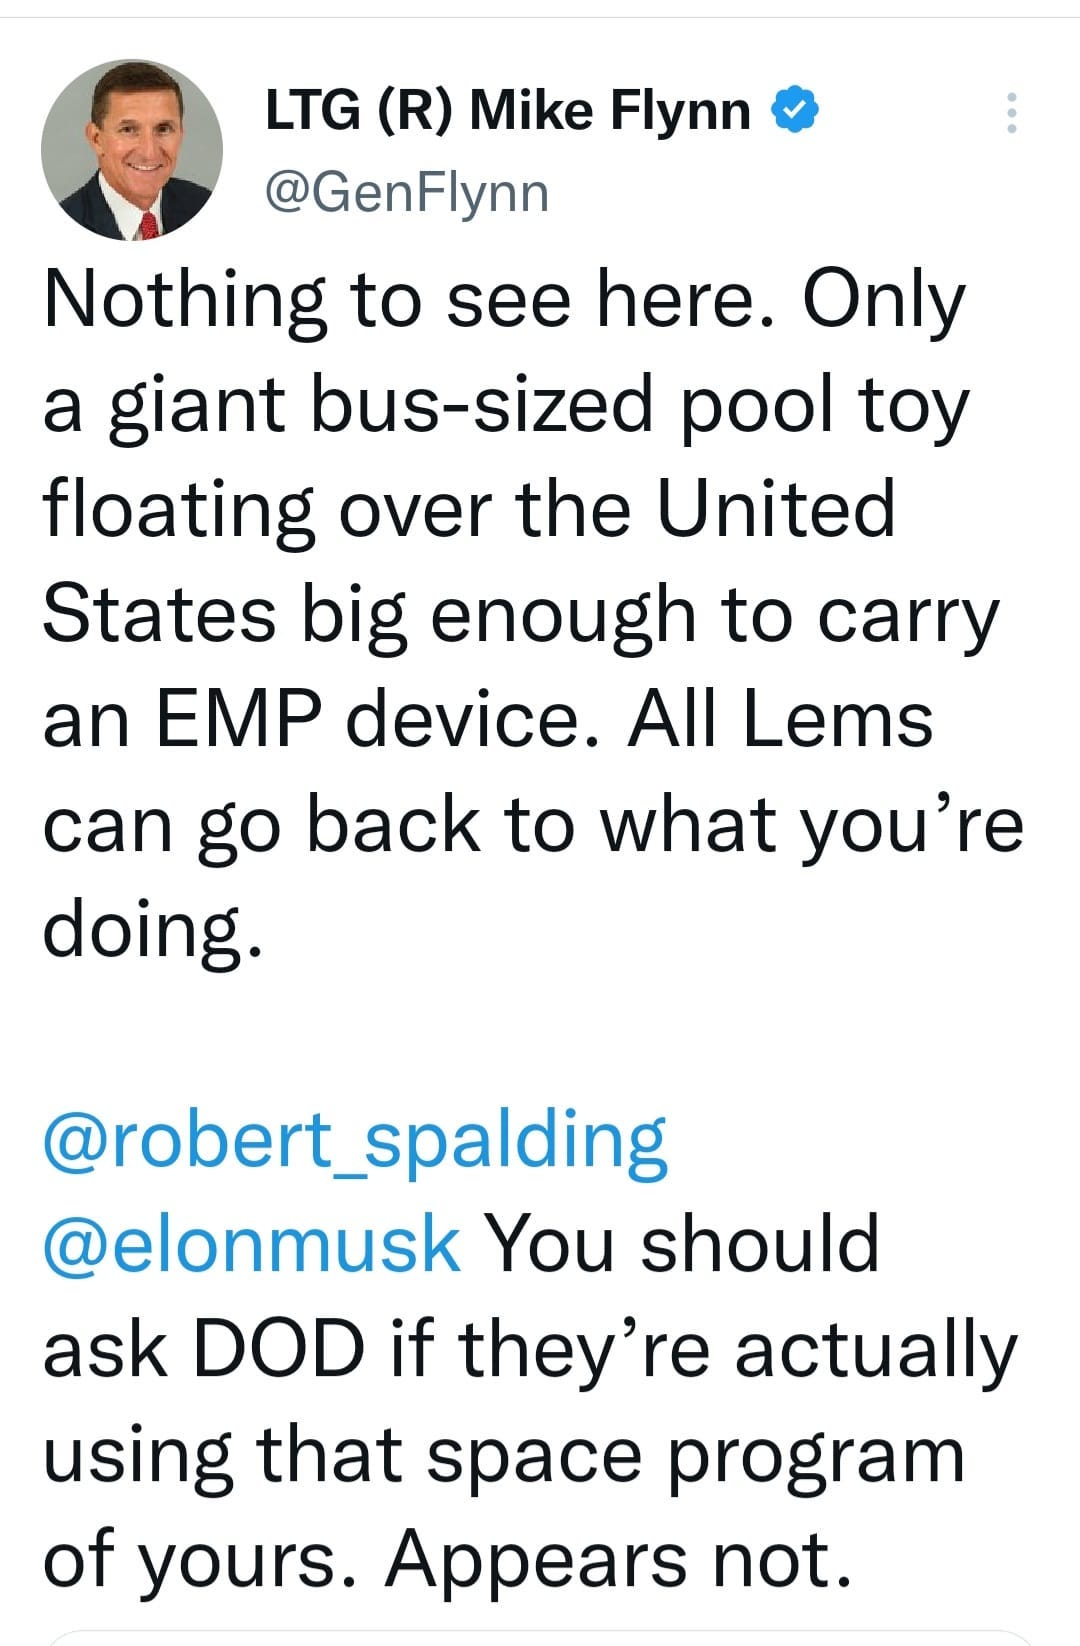 May be an image of 1 person and text that says 'LTG (R) Mike Flynn @GenFlynn Nothing to see here. Only a giant bus-sized pool toy floating over the United States big enough to carry an EMP device. All Lems can go back to what you're doing. @robert_spalding @elonmusk You should ask DOD if they're actually using that space program of yours. Appears not.'